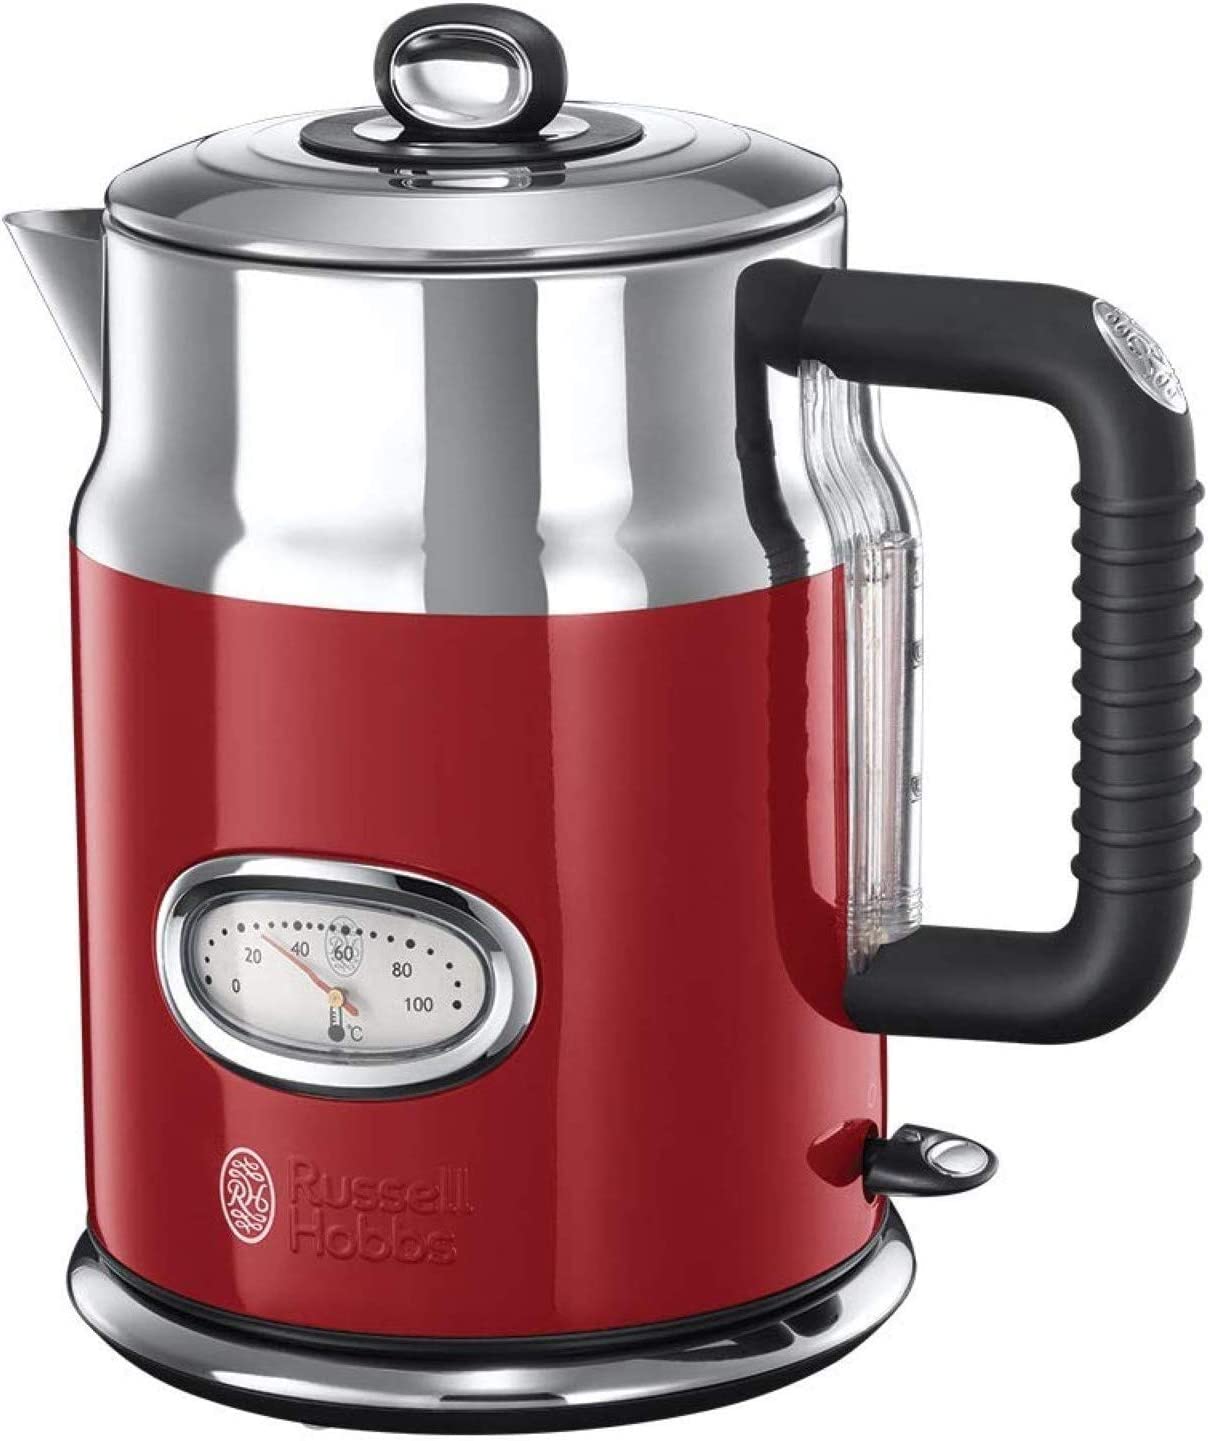 RUSSELL HOBBS Retro 21670 Kettle, Red